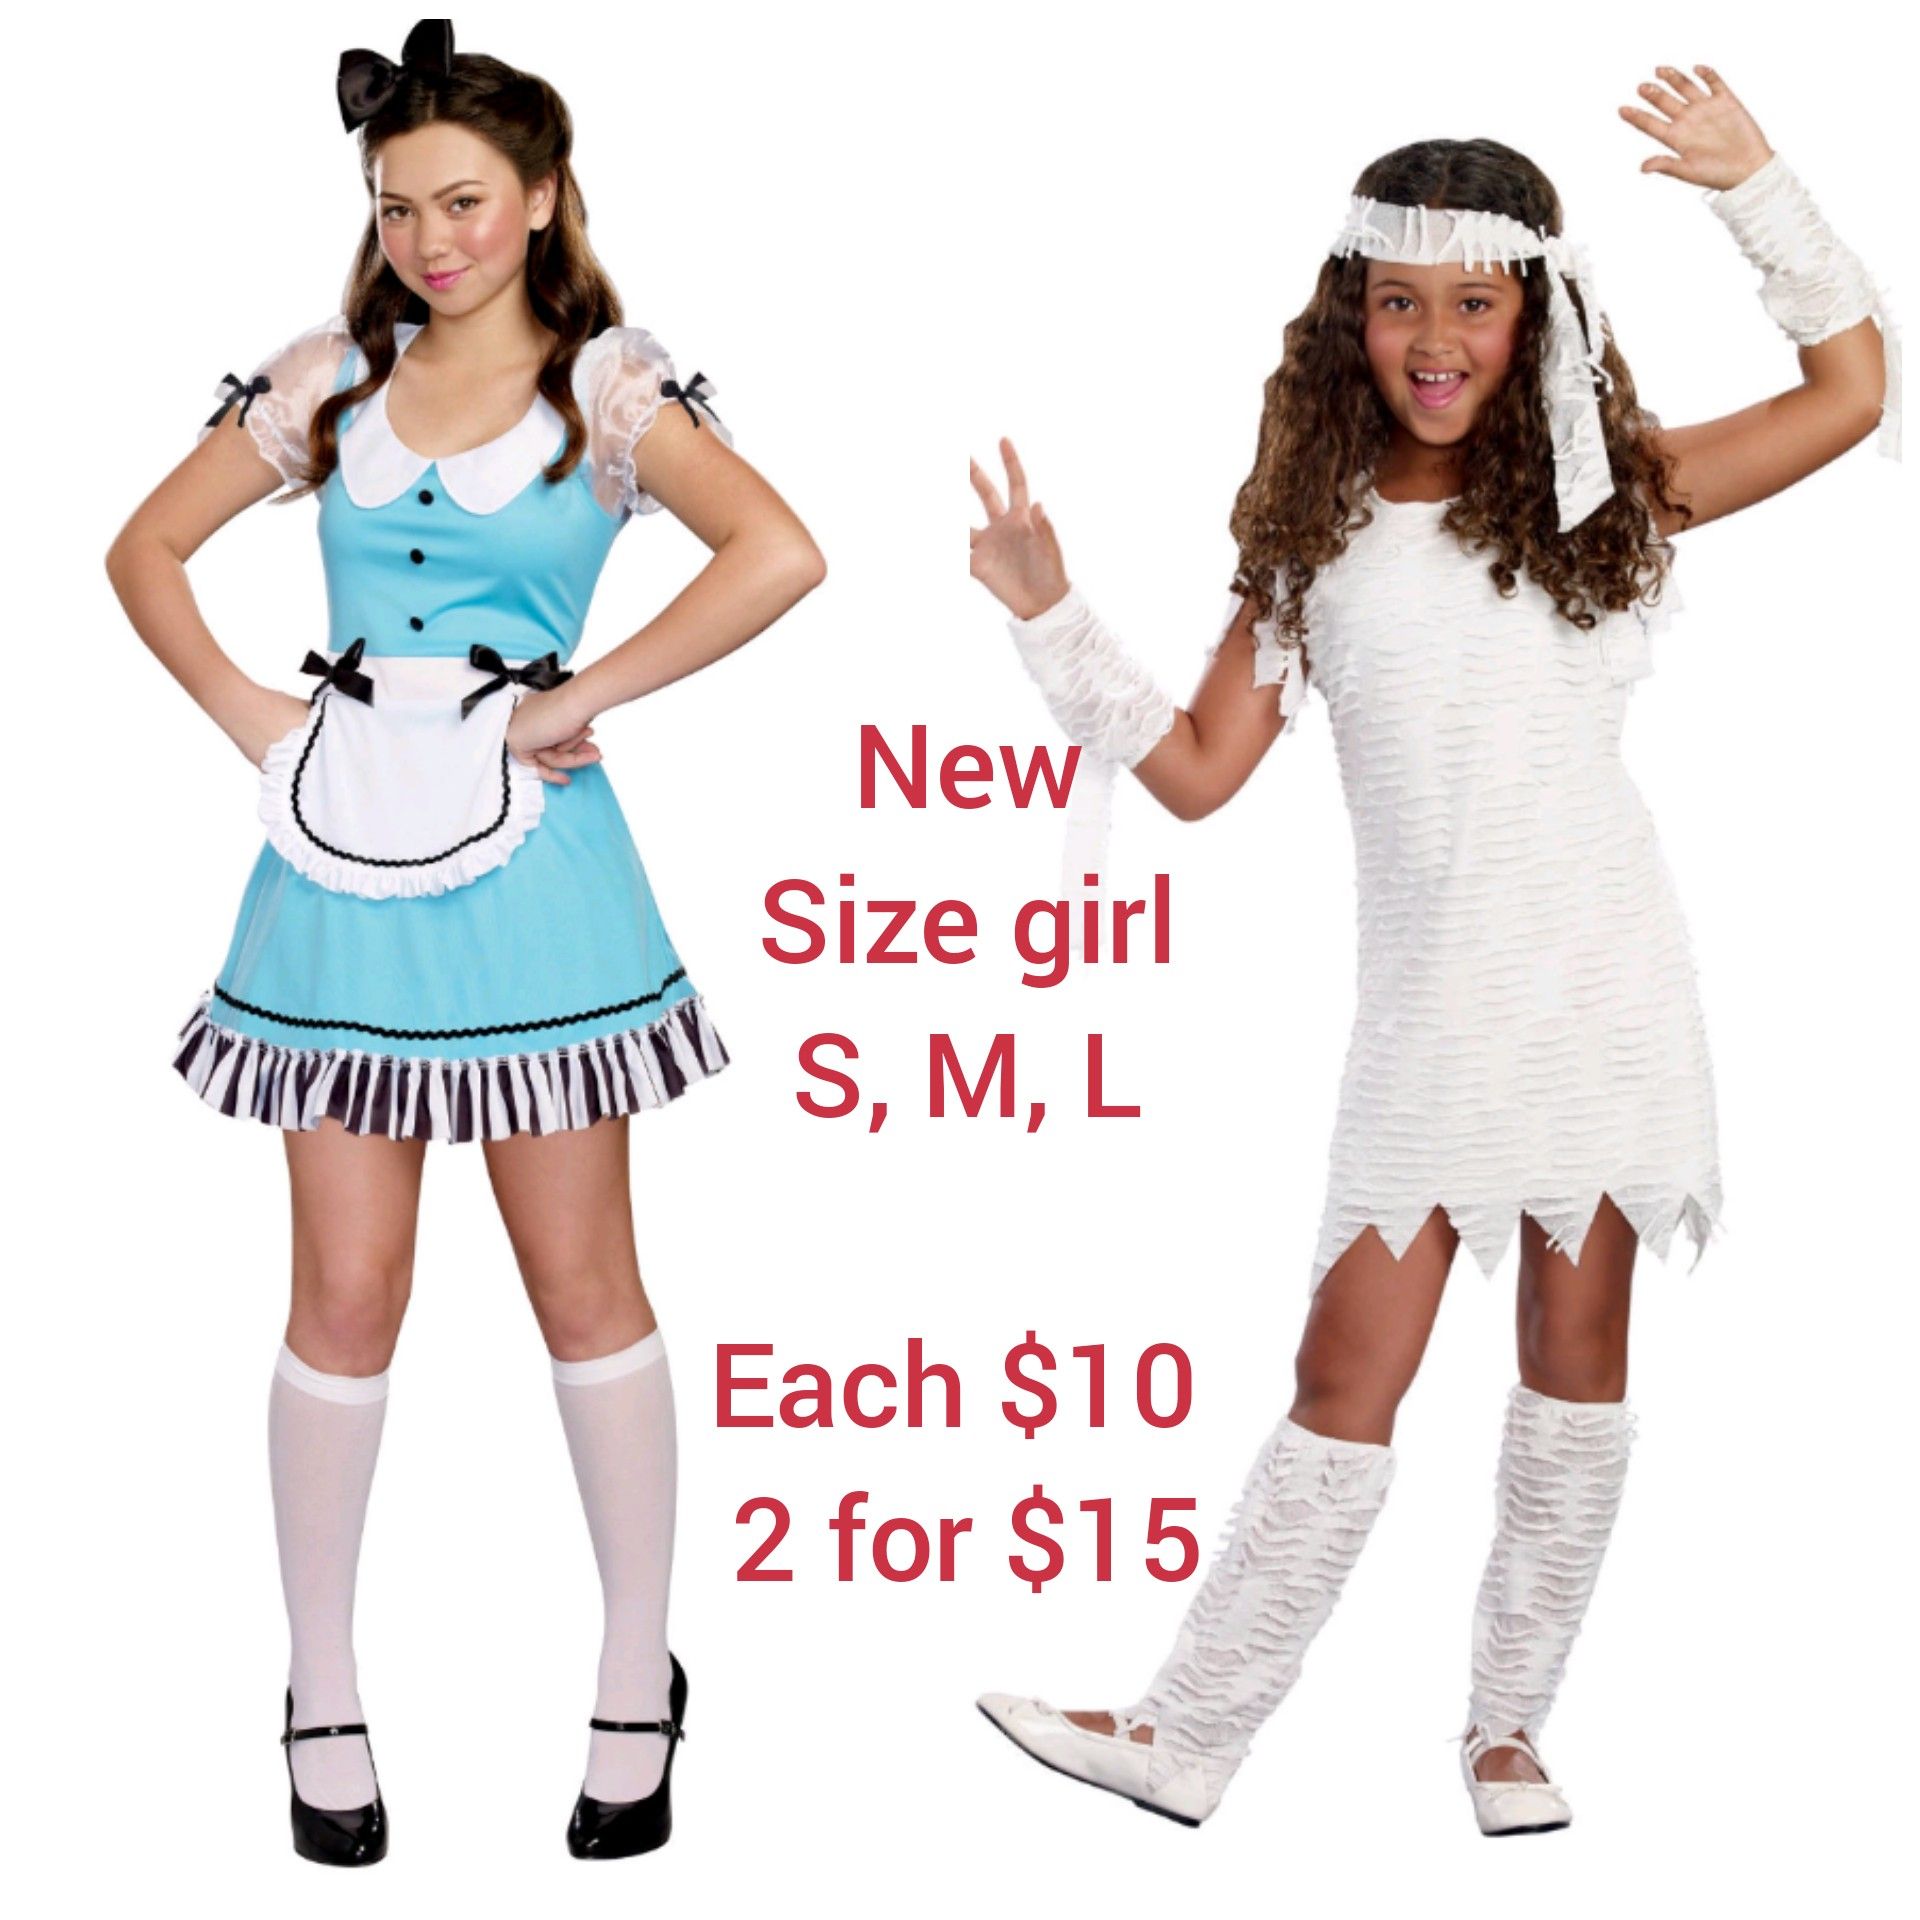 Brand new Halloween girl costumes. Size S, M, L